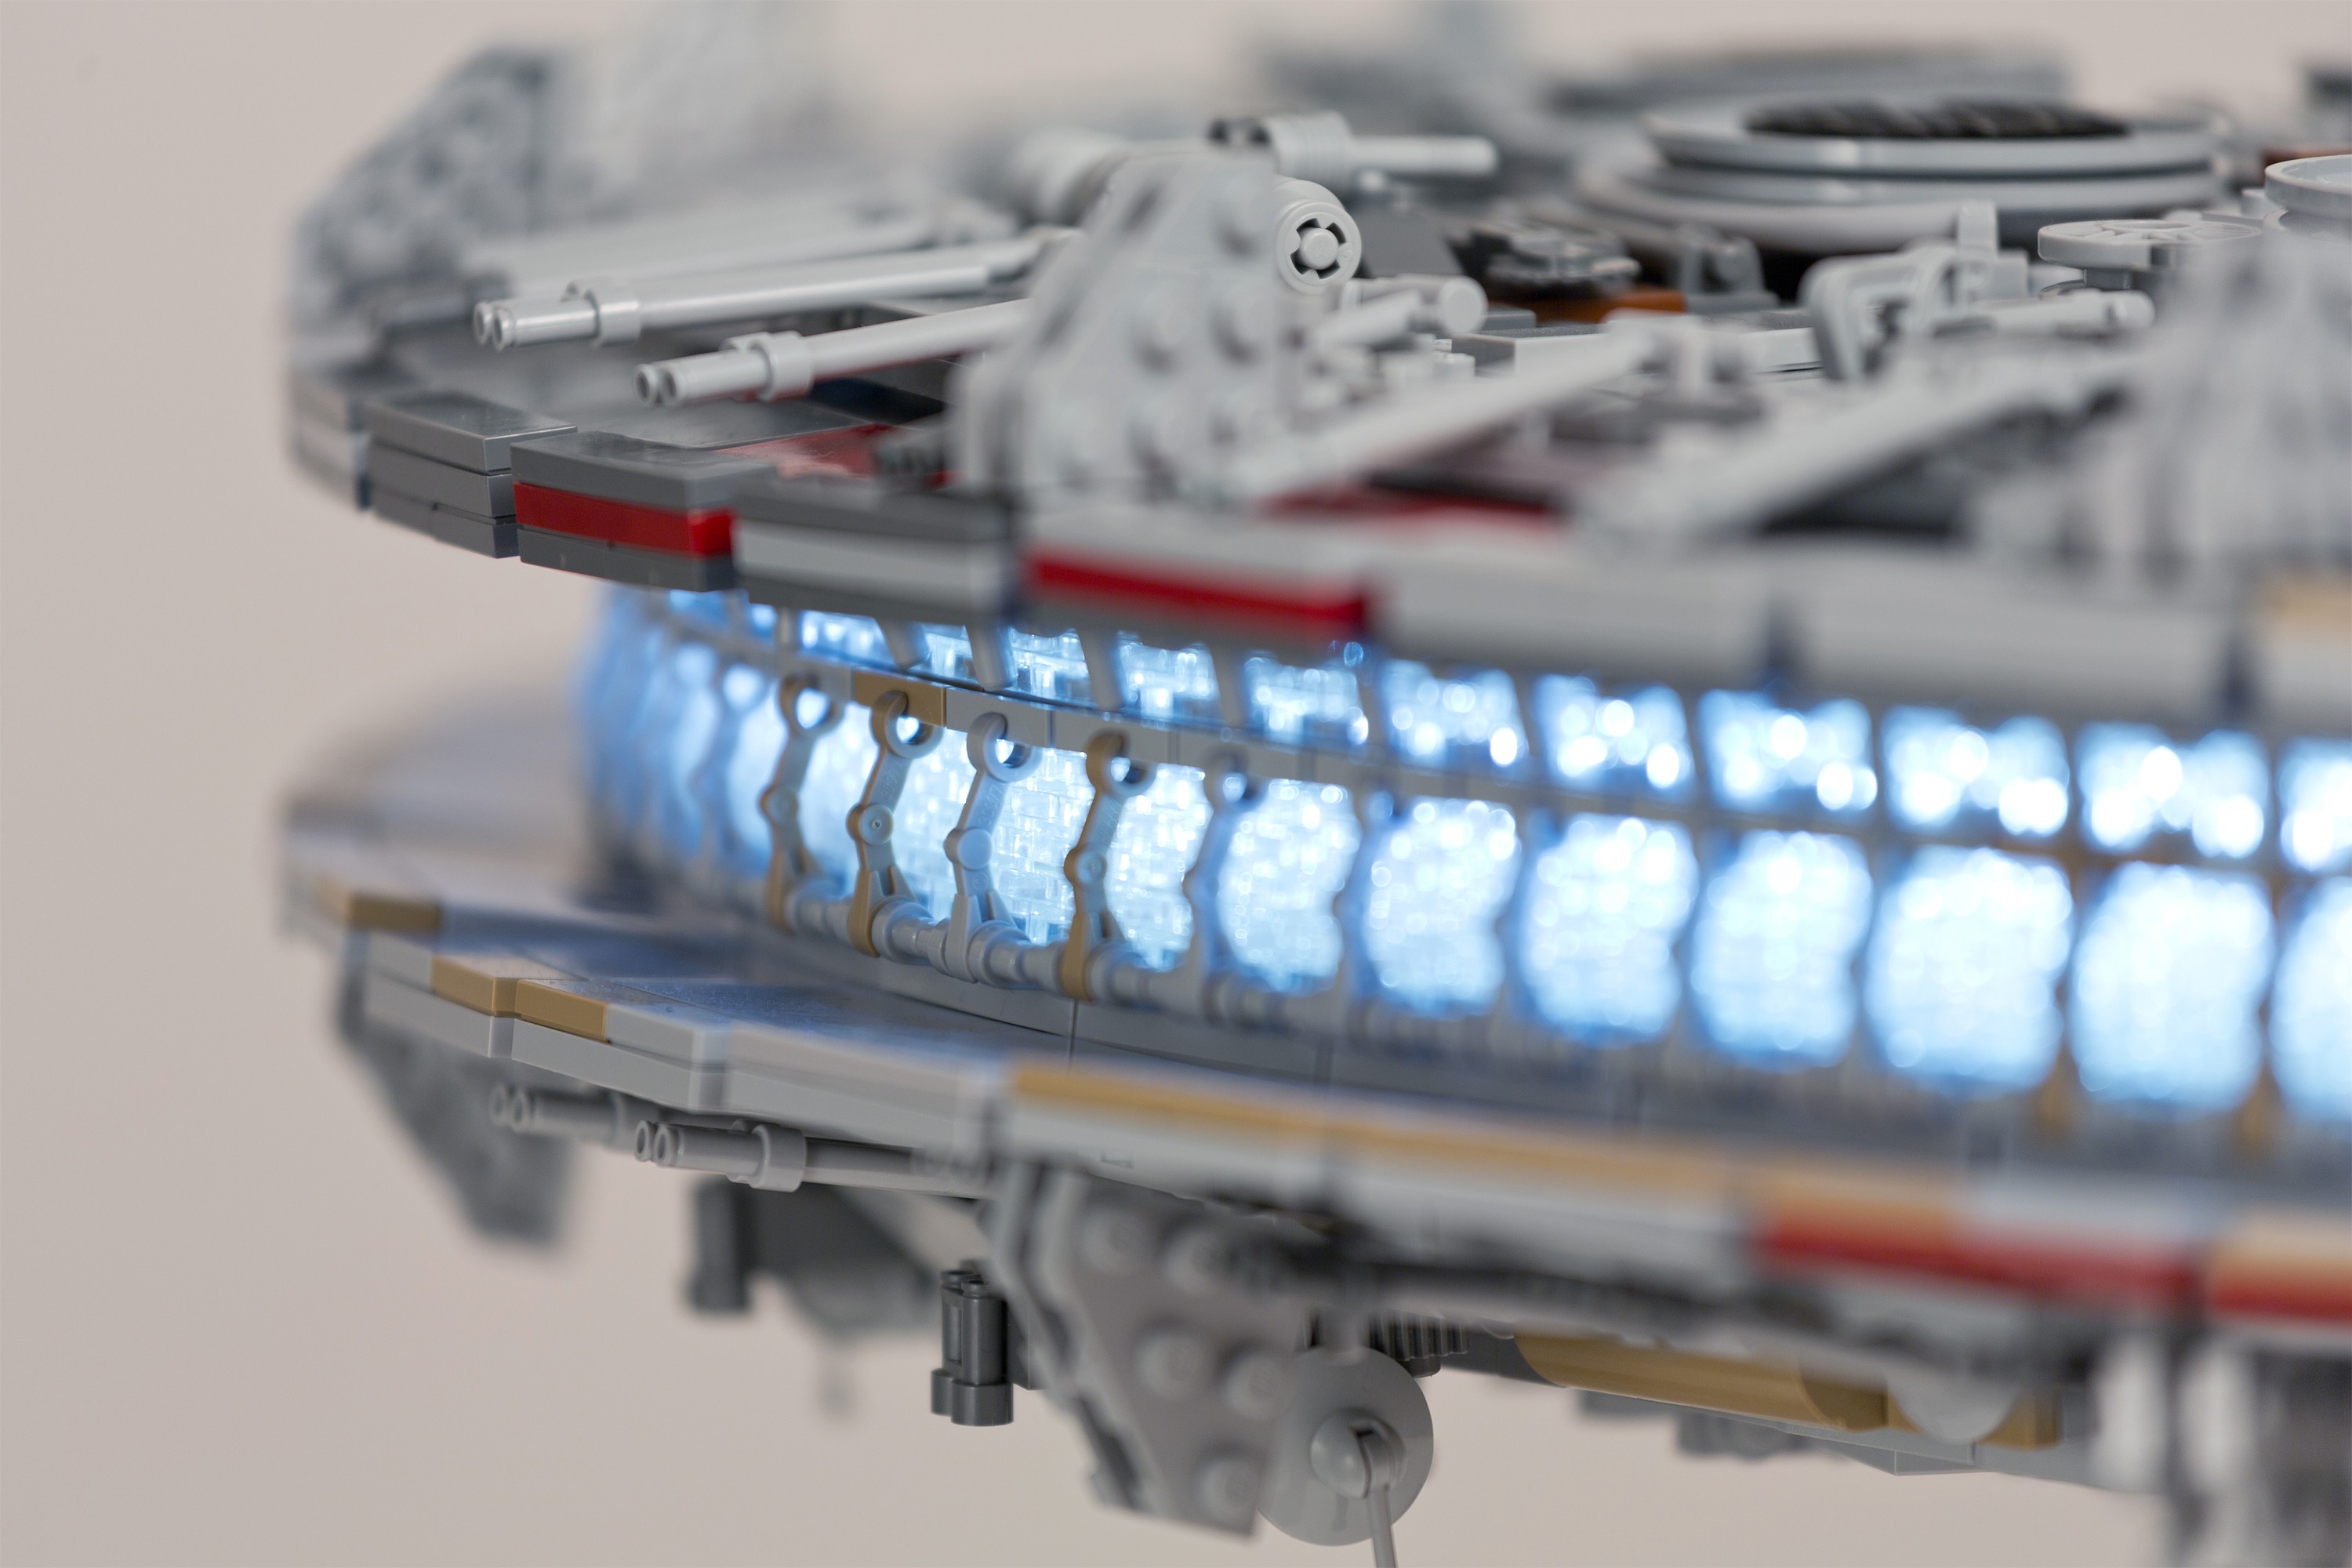 This astonishingly detailed LEGO Millennium Falcon took 7,500 pieces and over a year to build 